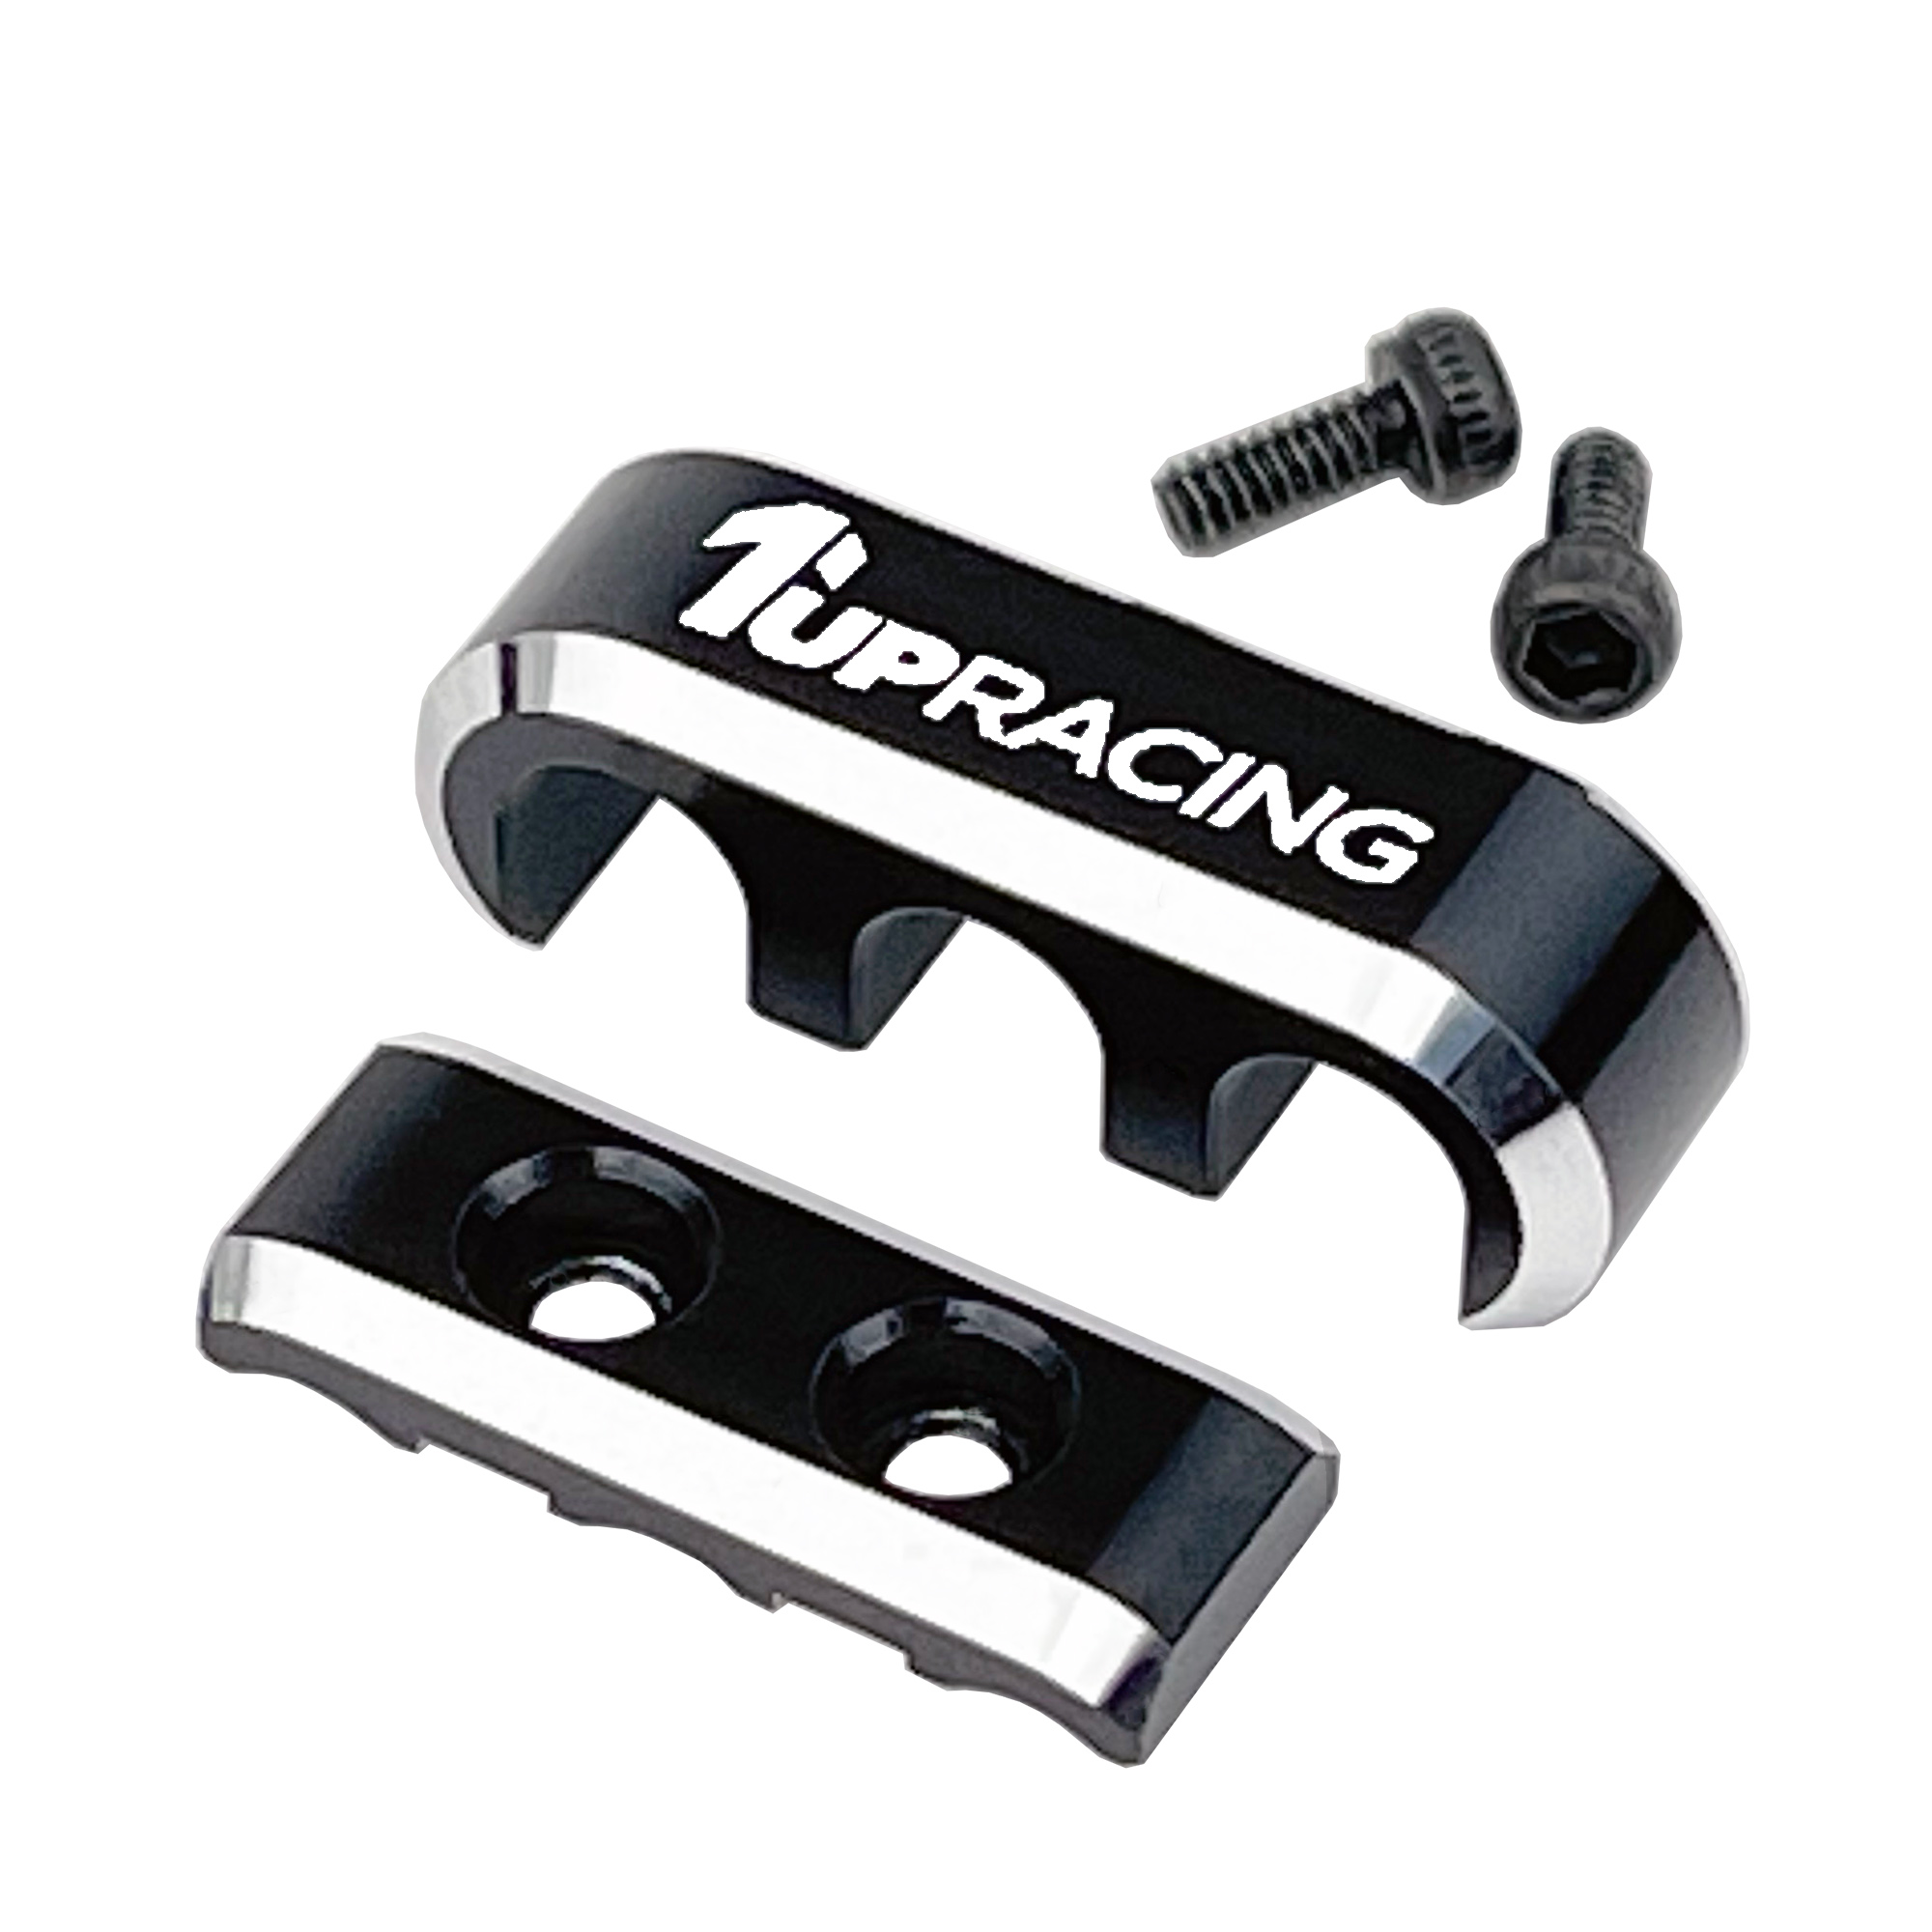 1up Racing: Pro Wire Clamp - 12/14 Gauge 3 Wire